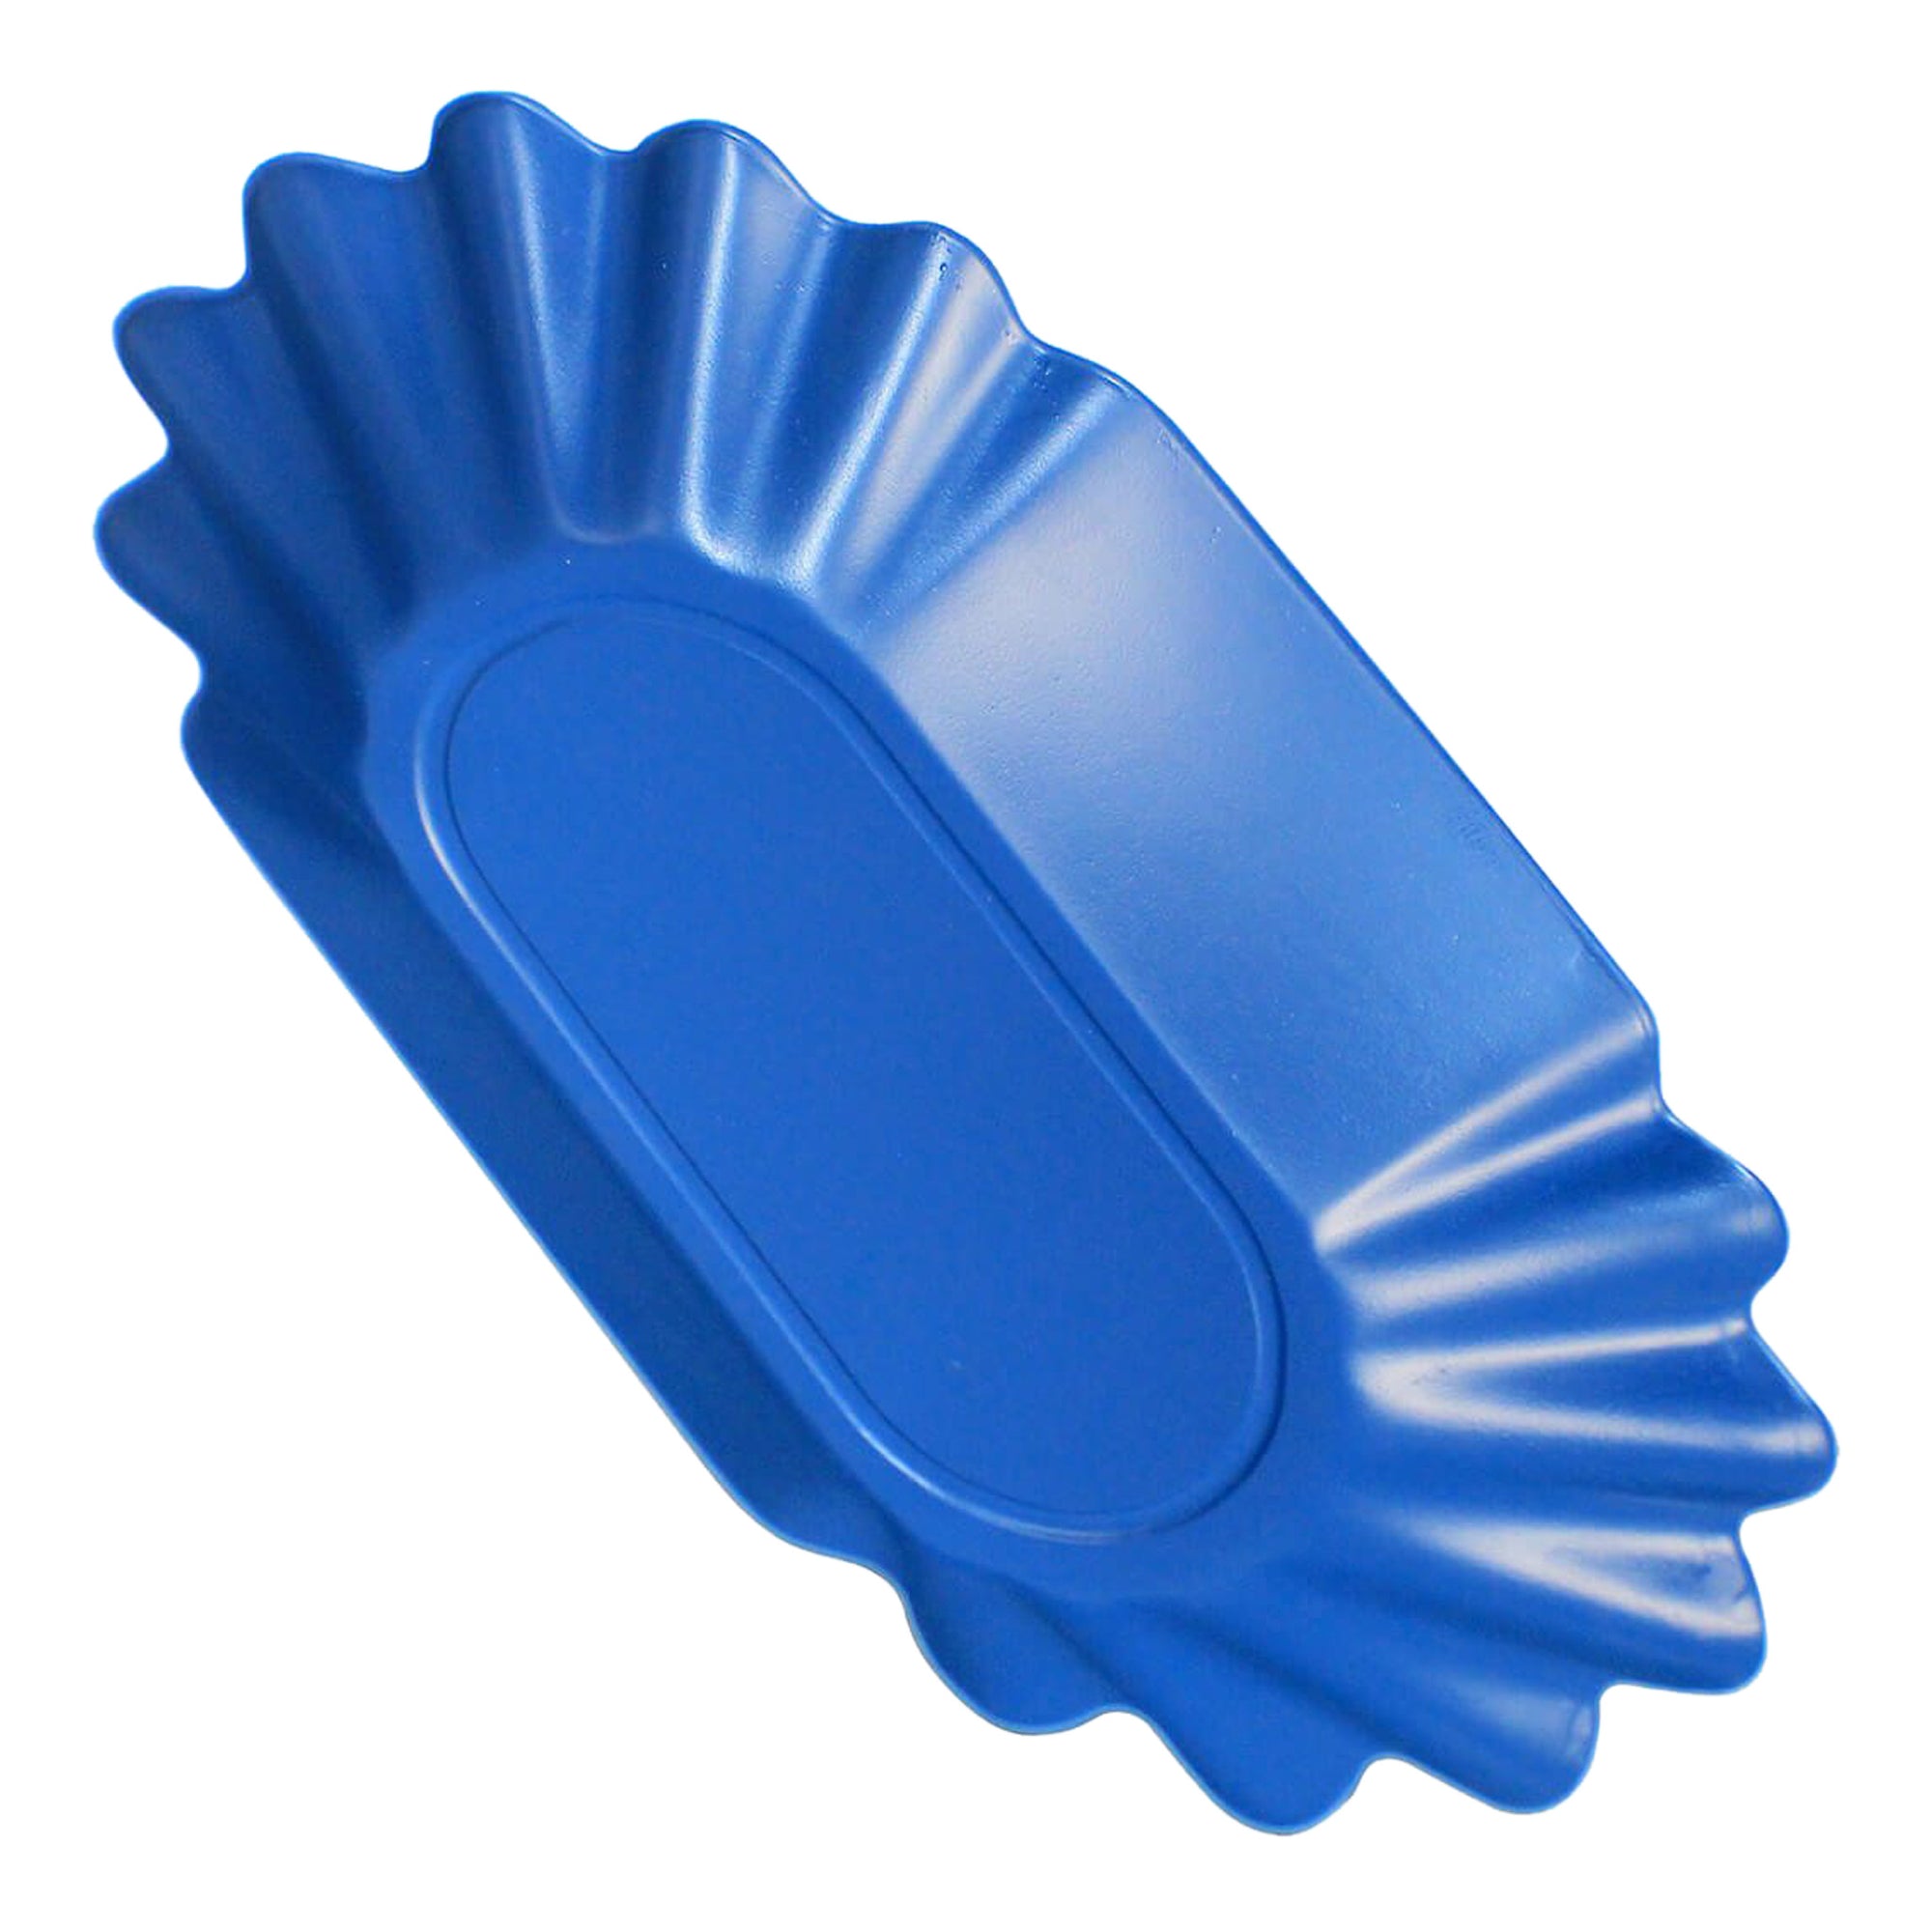 Blue Oval Cupping Tray 12pcs - Rhinowares